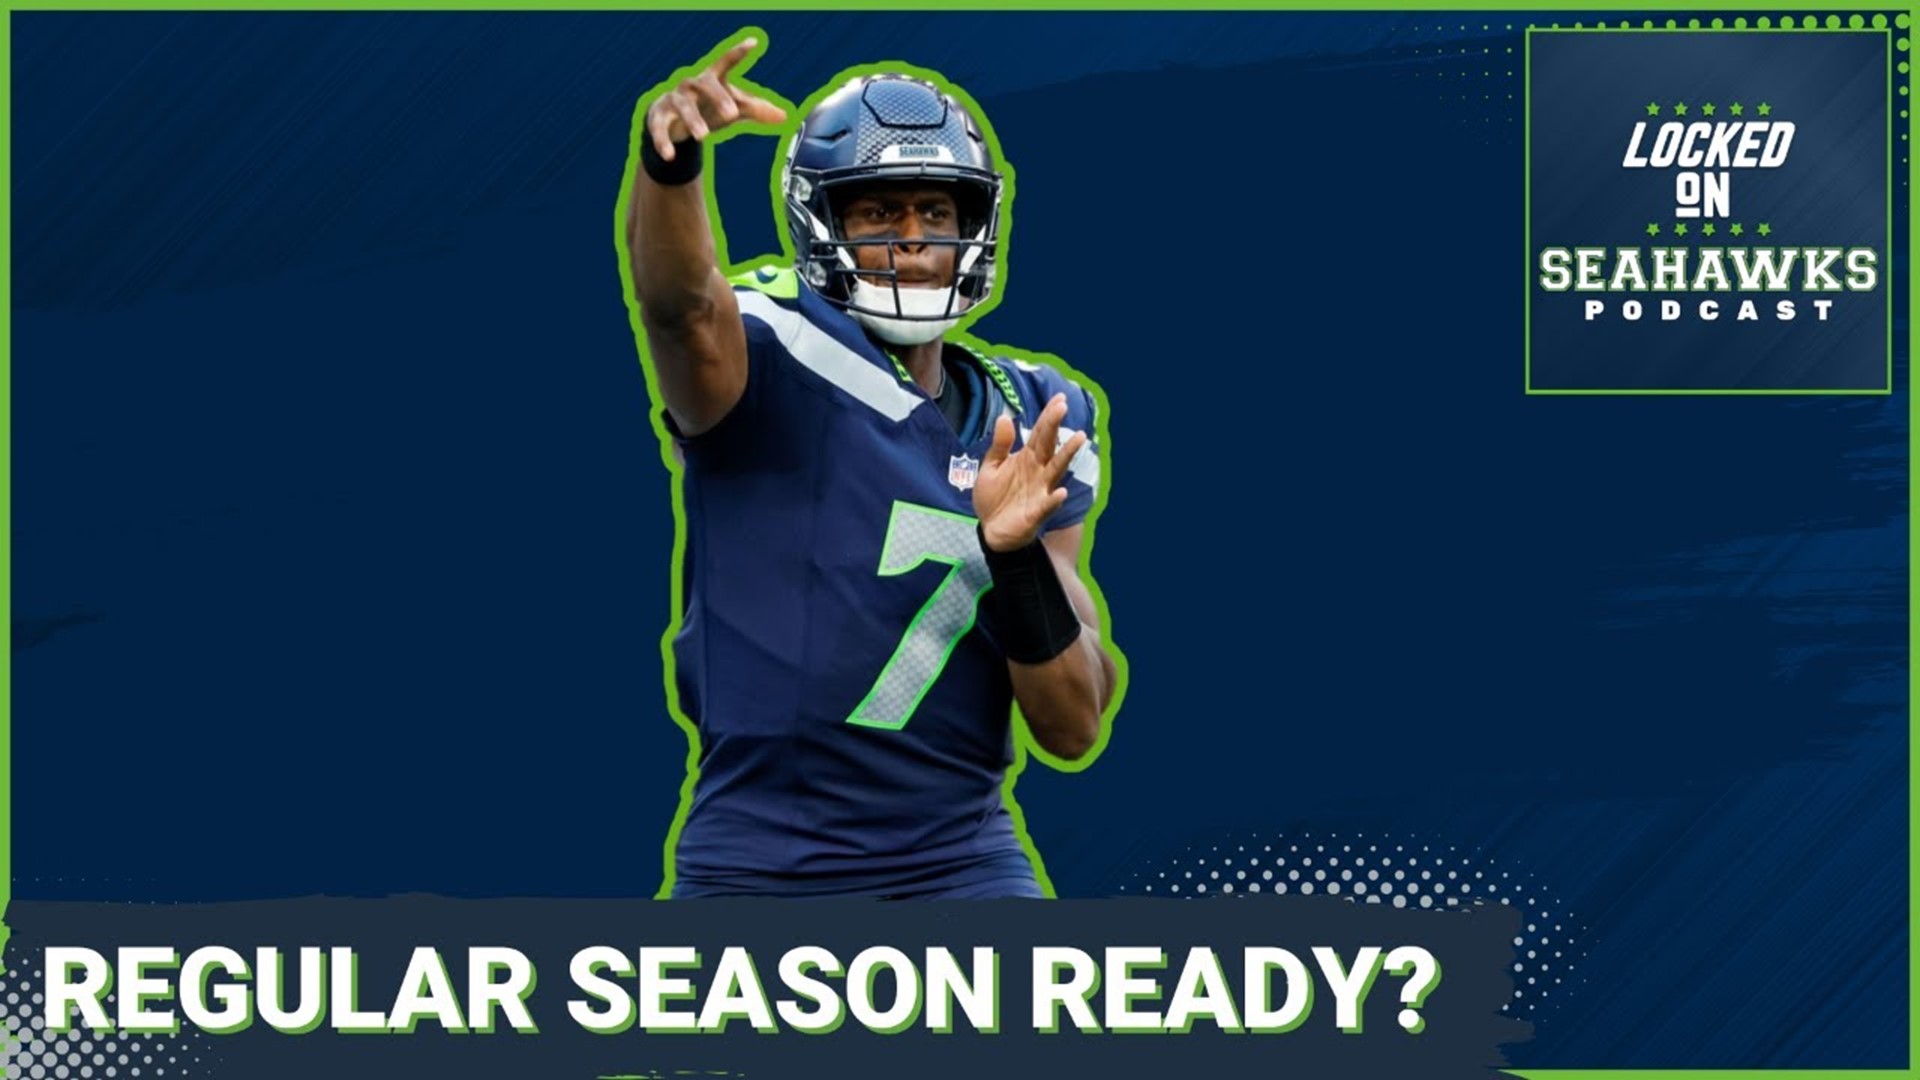 Though one preseason game remains in Green Bay on Saturday, the Seahawks likely got their last look at Geno Smith and the majority of their starters